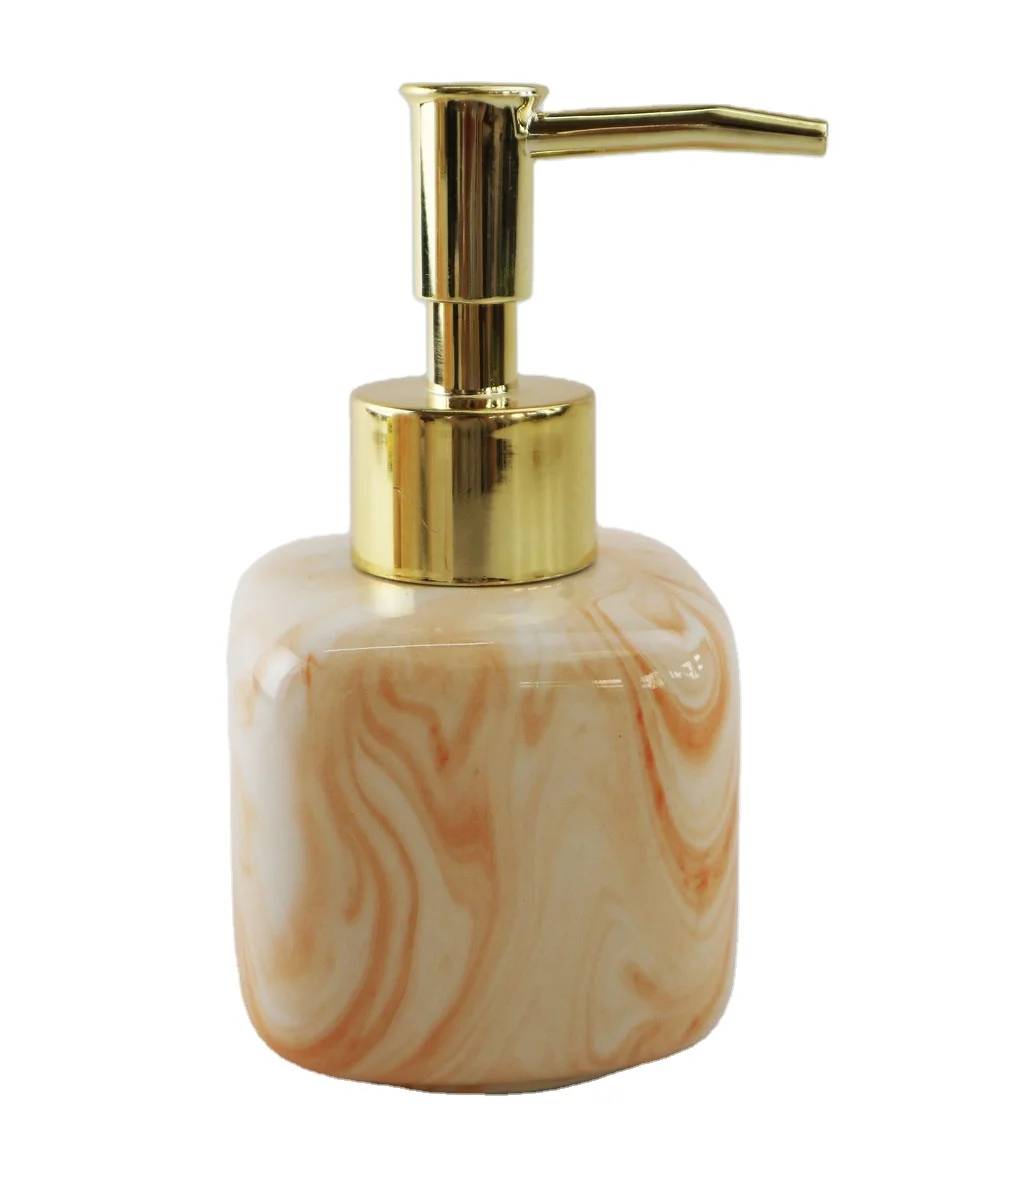 Hot marble lotion dispenser toothbrush holder placement bathroom set soap dispenser tumble soap tray